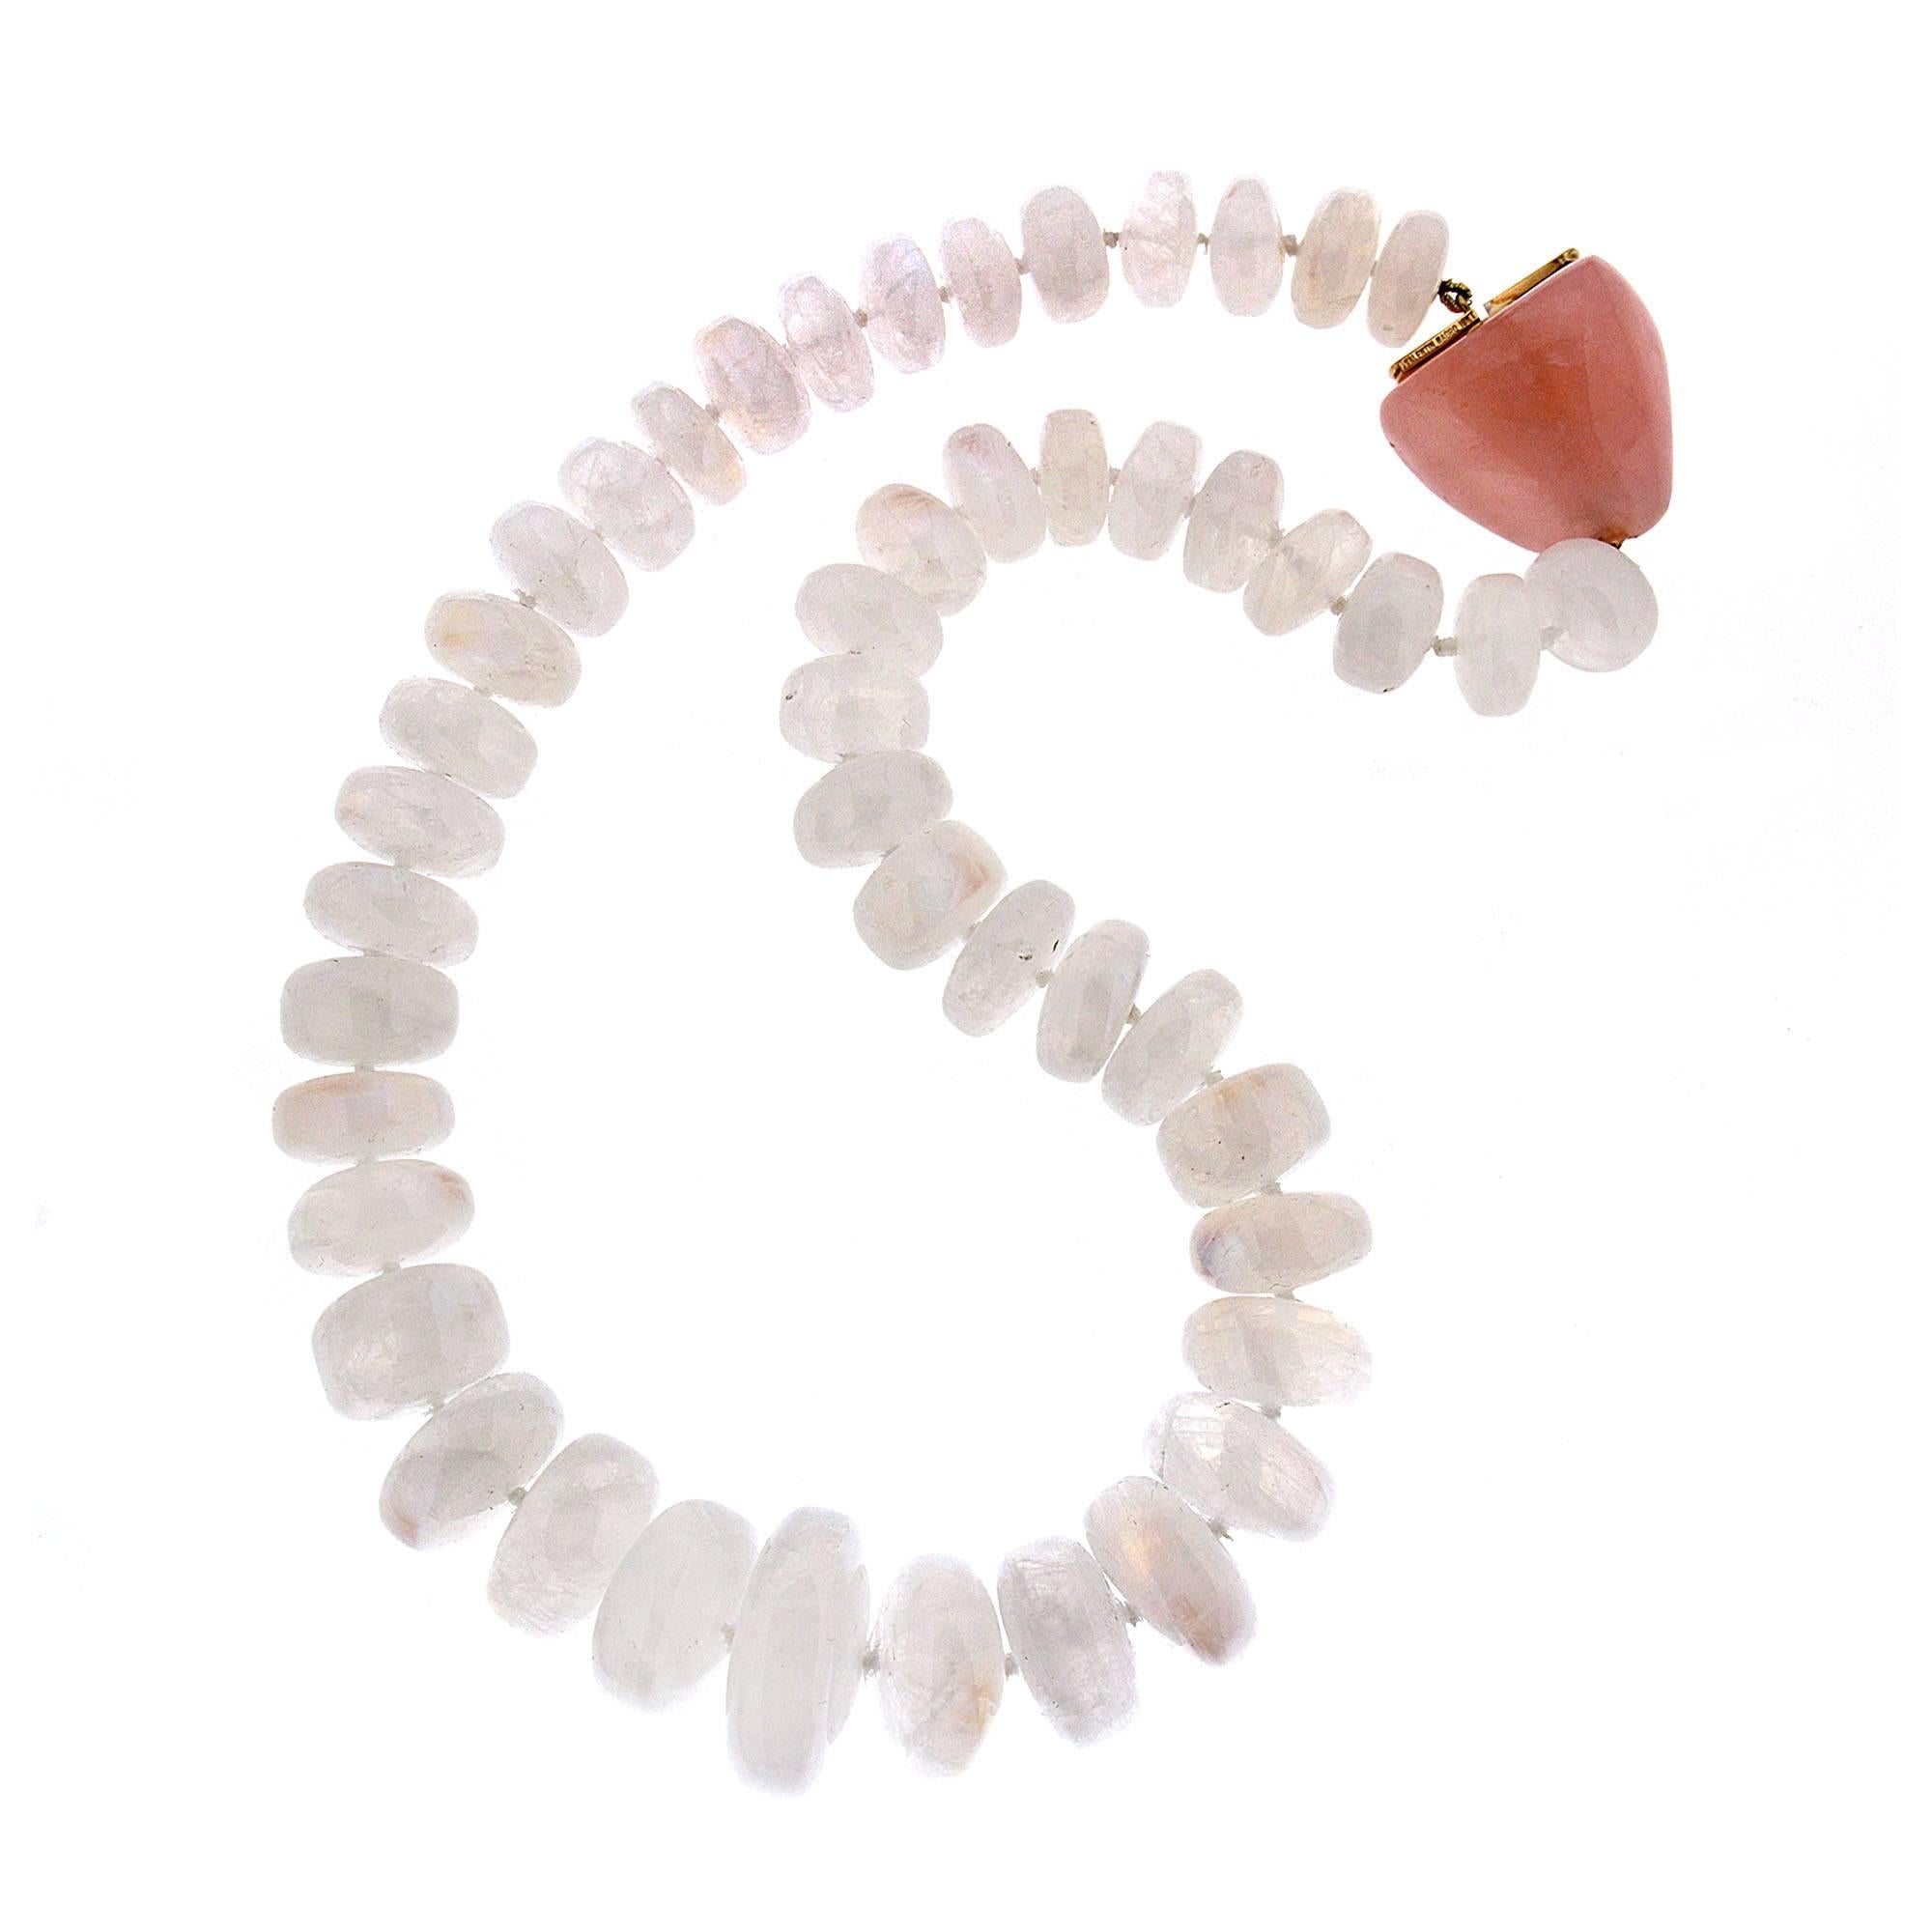 This lovely necklace features moonstone rondelles and large rose quartz clasp in 18kt yellow gold.